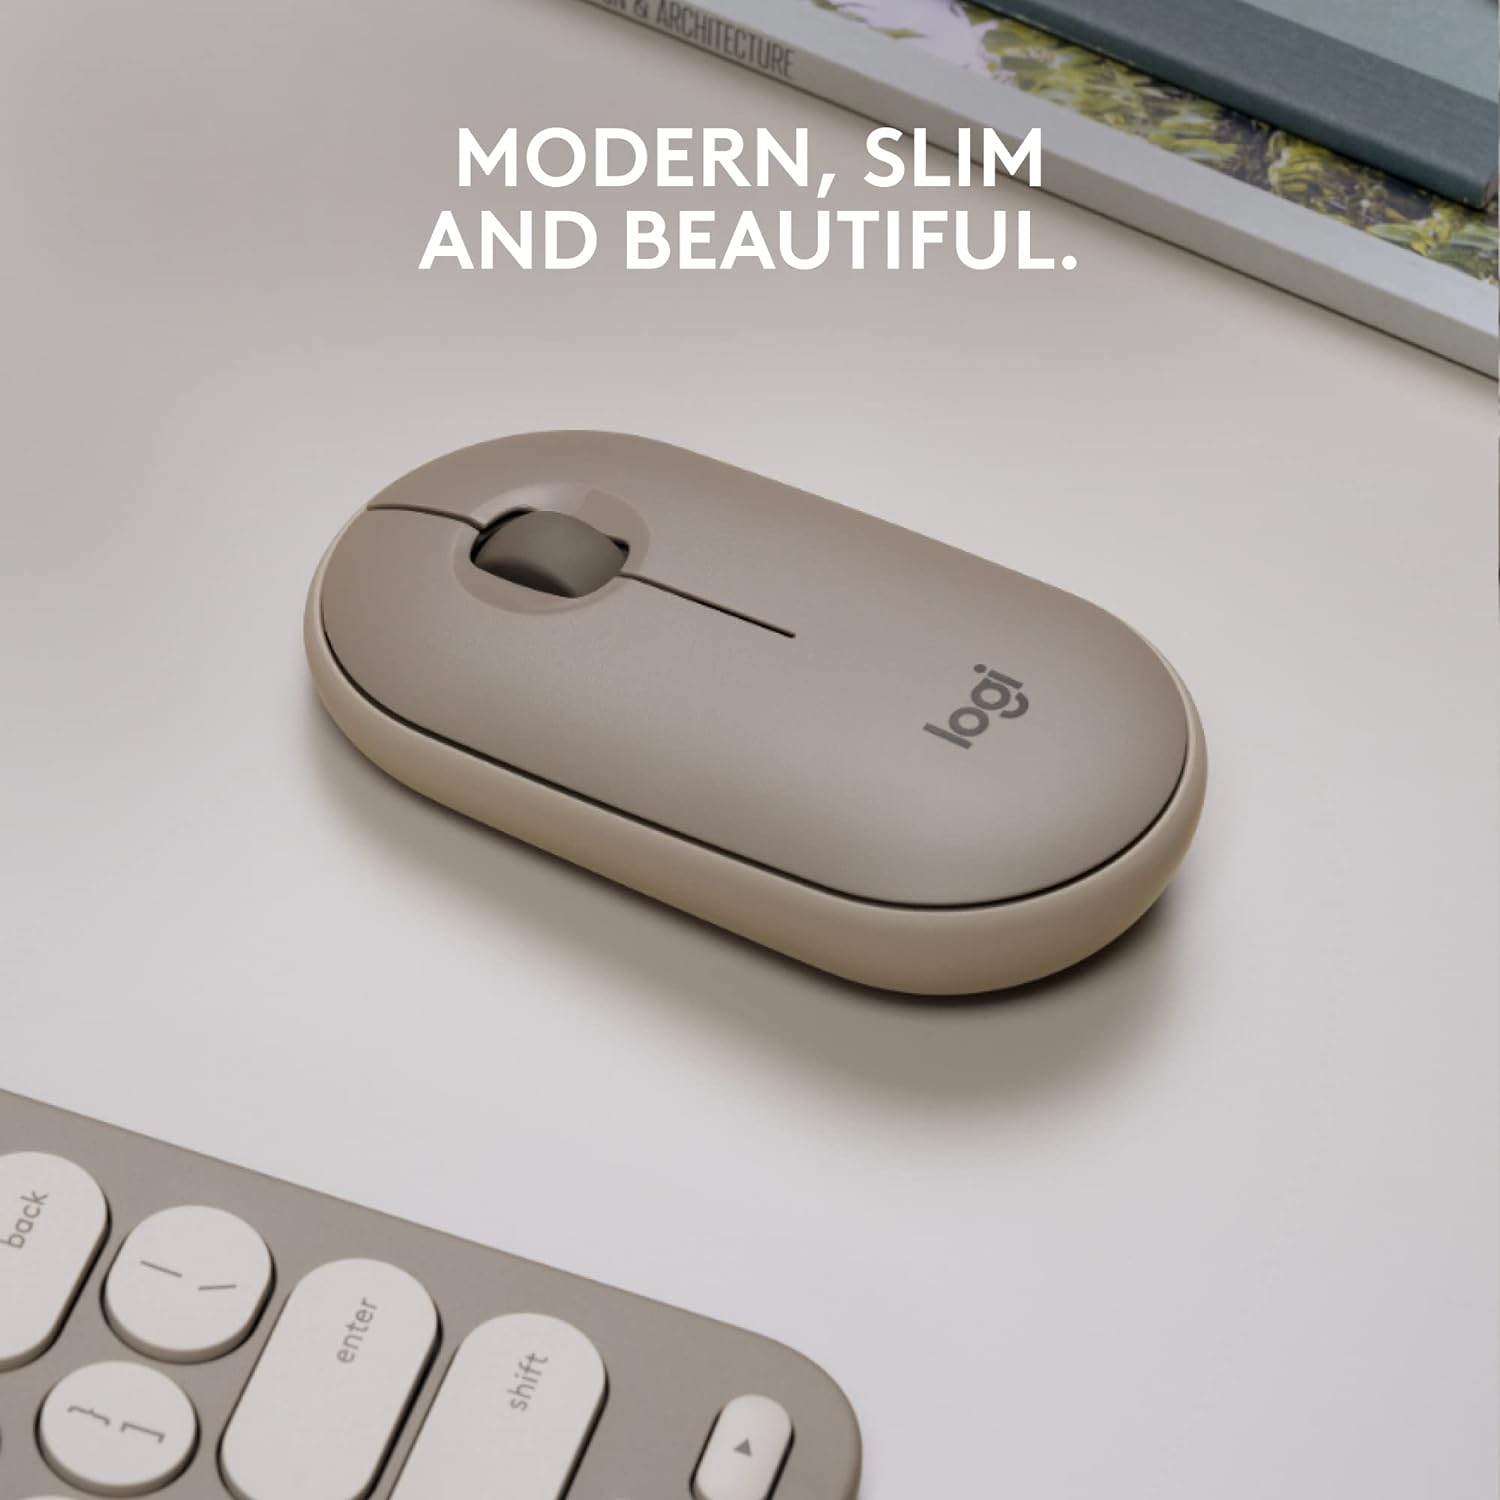 A large marketing image providing additional information about the product Logitech Pebble M350 Wireless Mouse - Sand - Additional alt info not provided